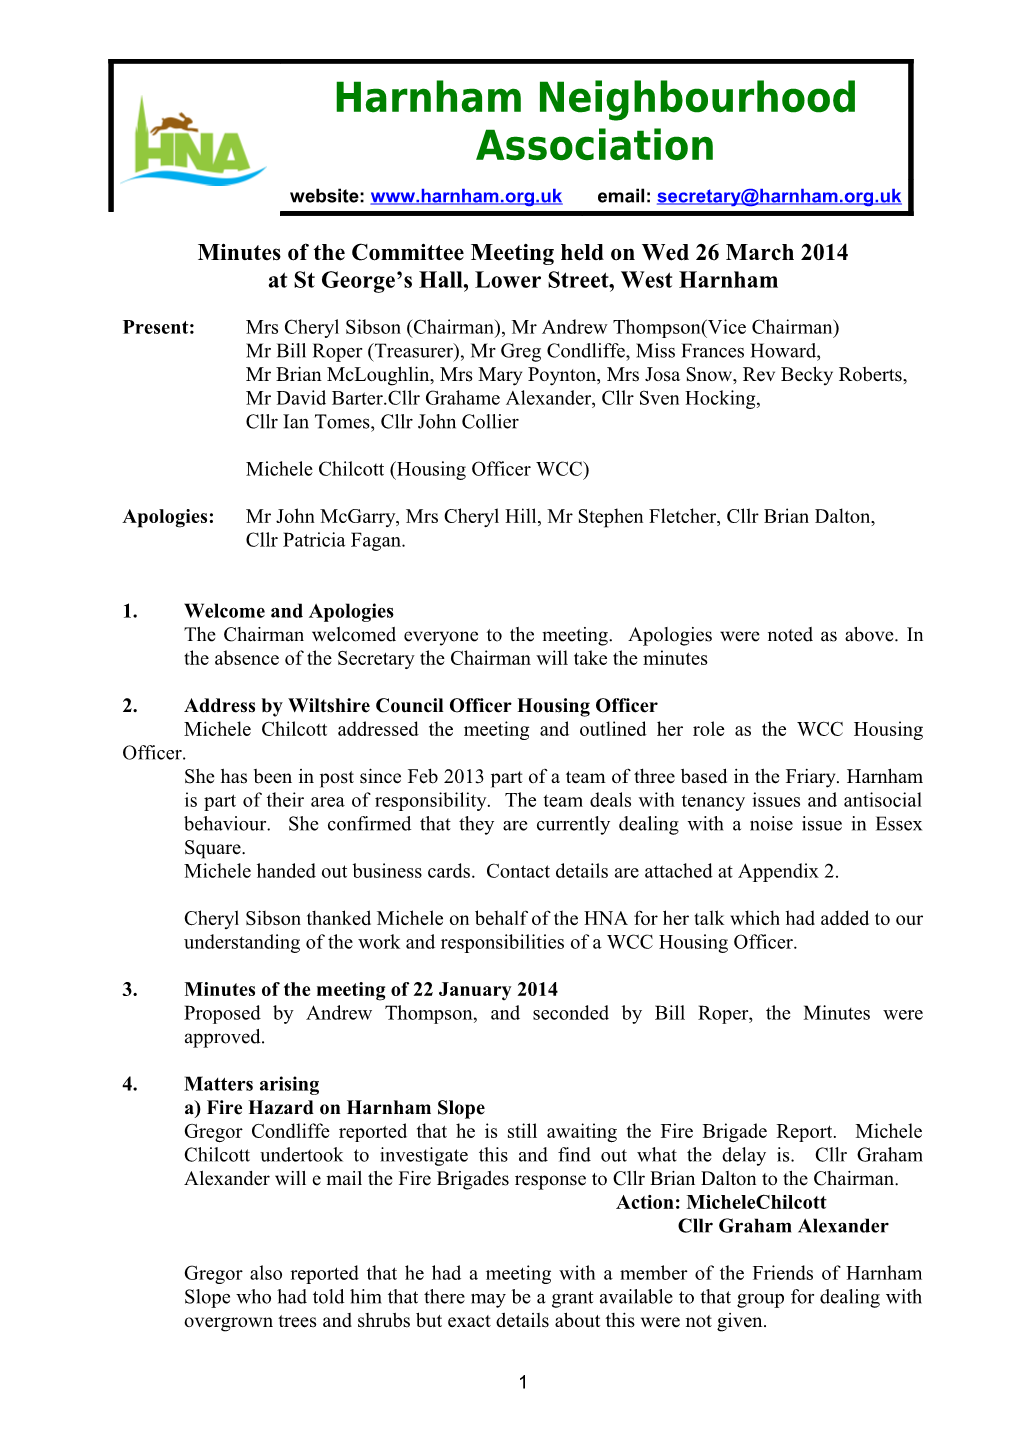 Minutes of the Committee Meeting Held on Wed 26 March 2014